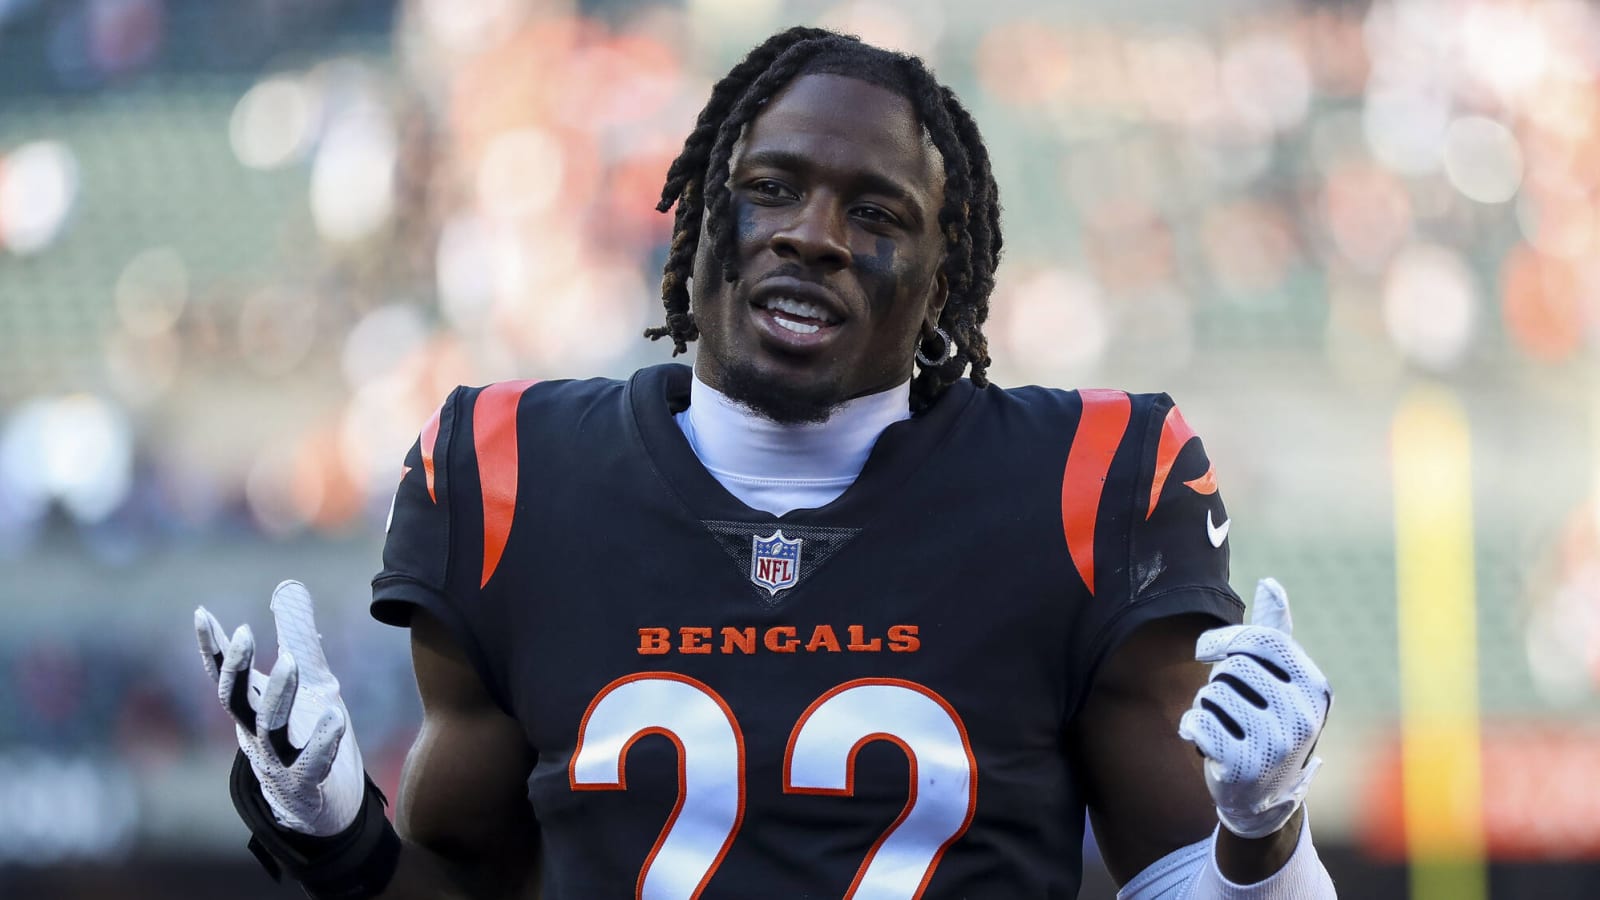 Bengals place two starters on physically unable to perform list